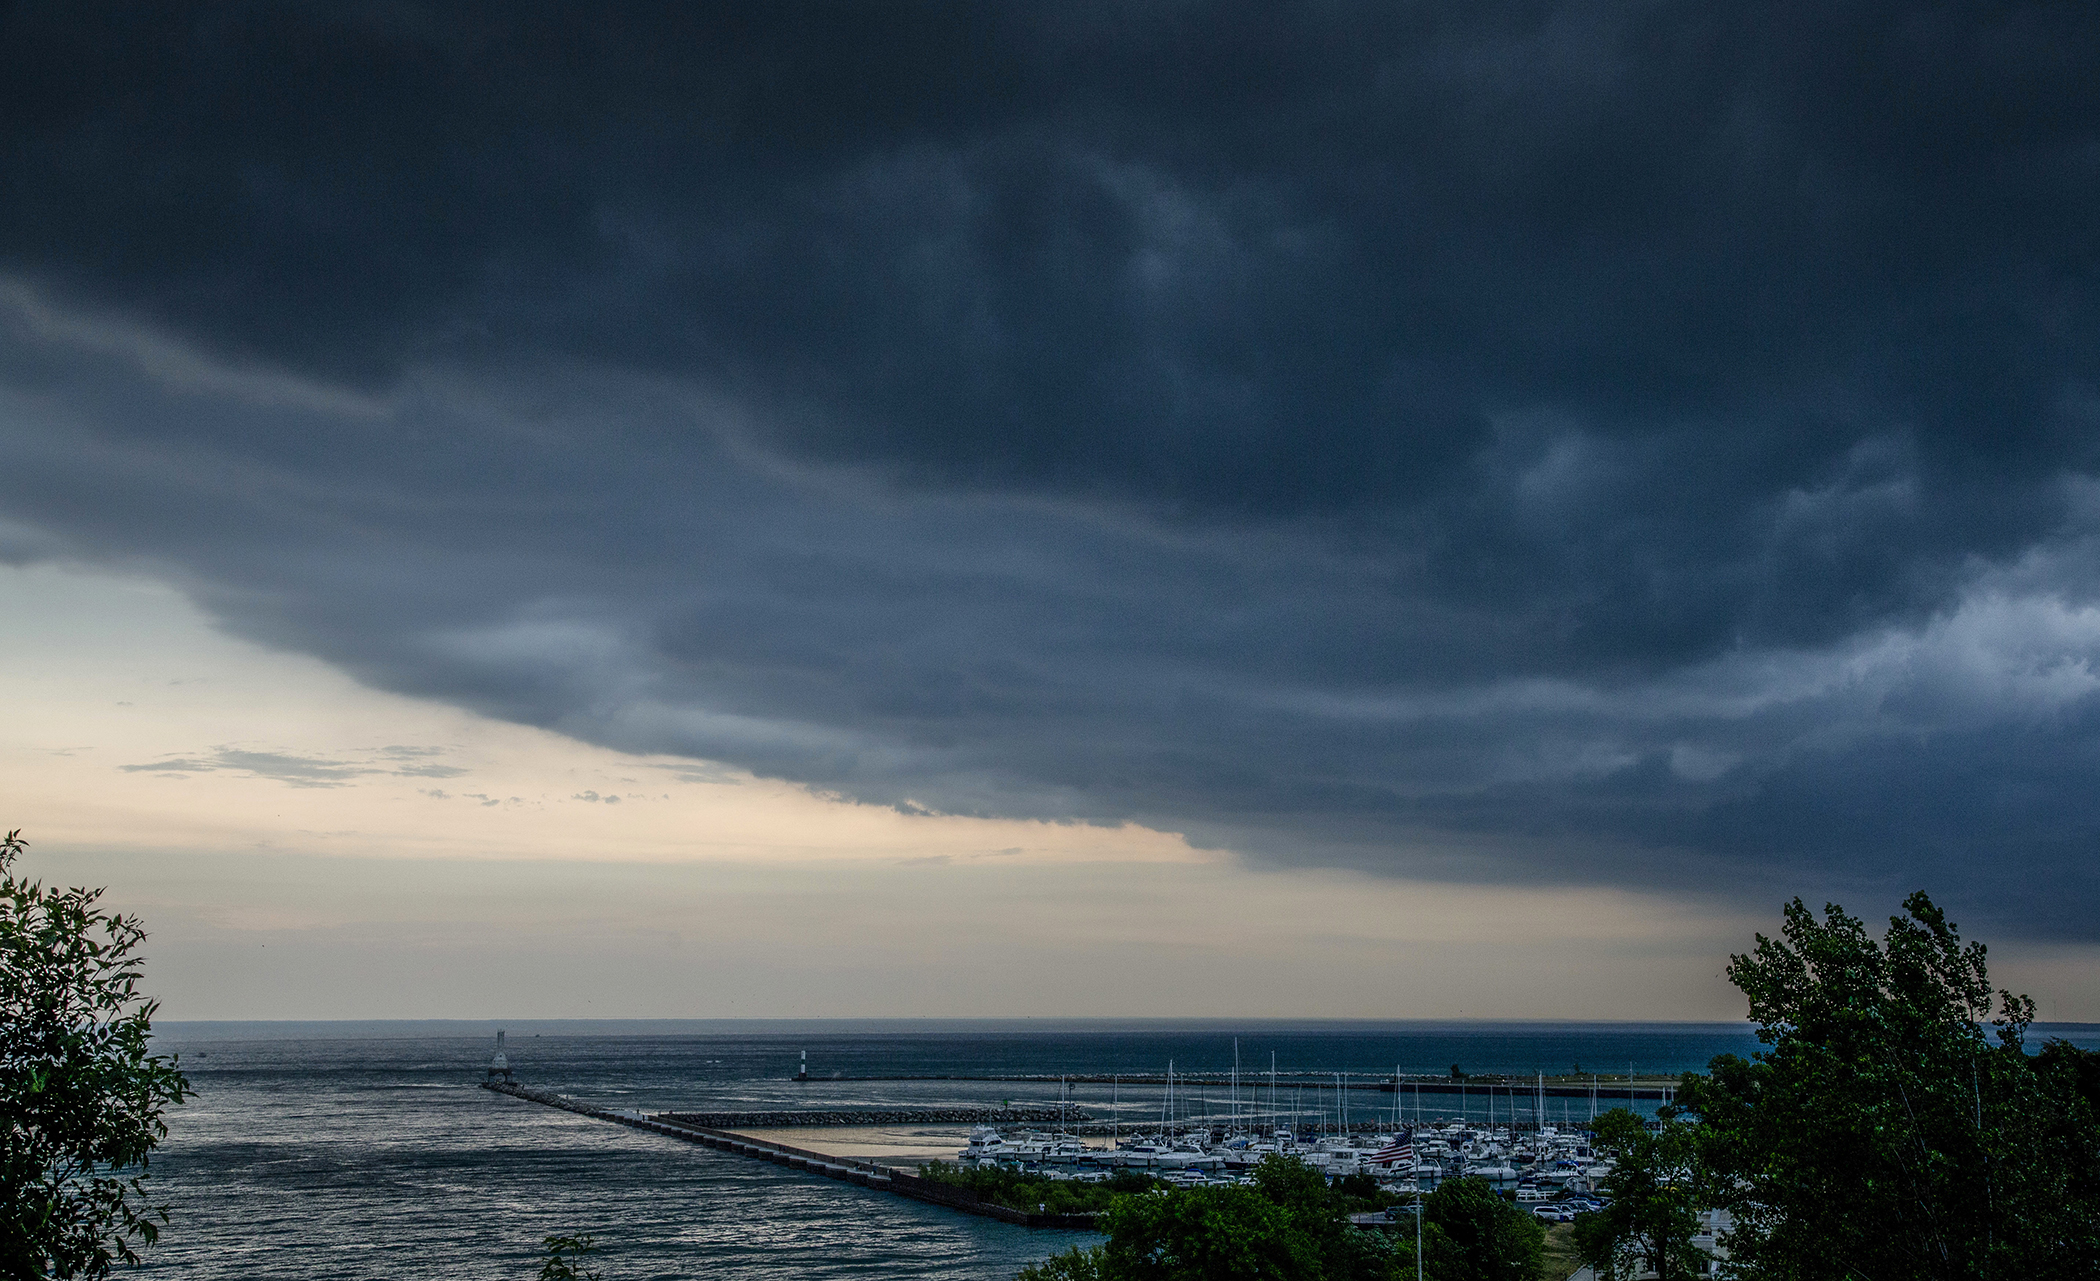 Storm clouds roll over the marina in Port Washington